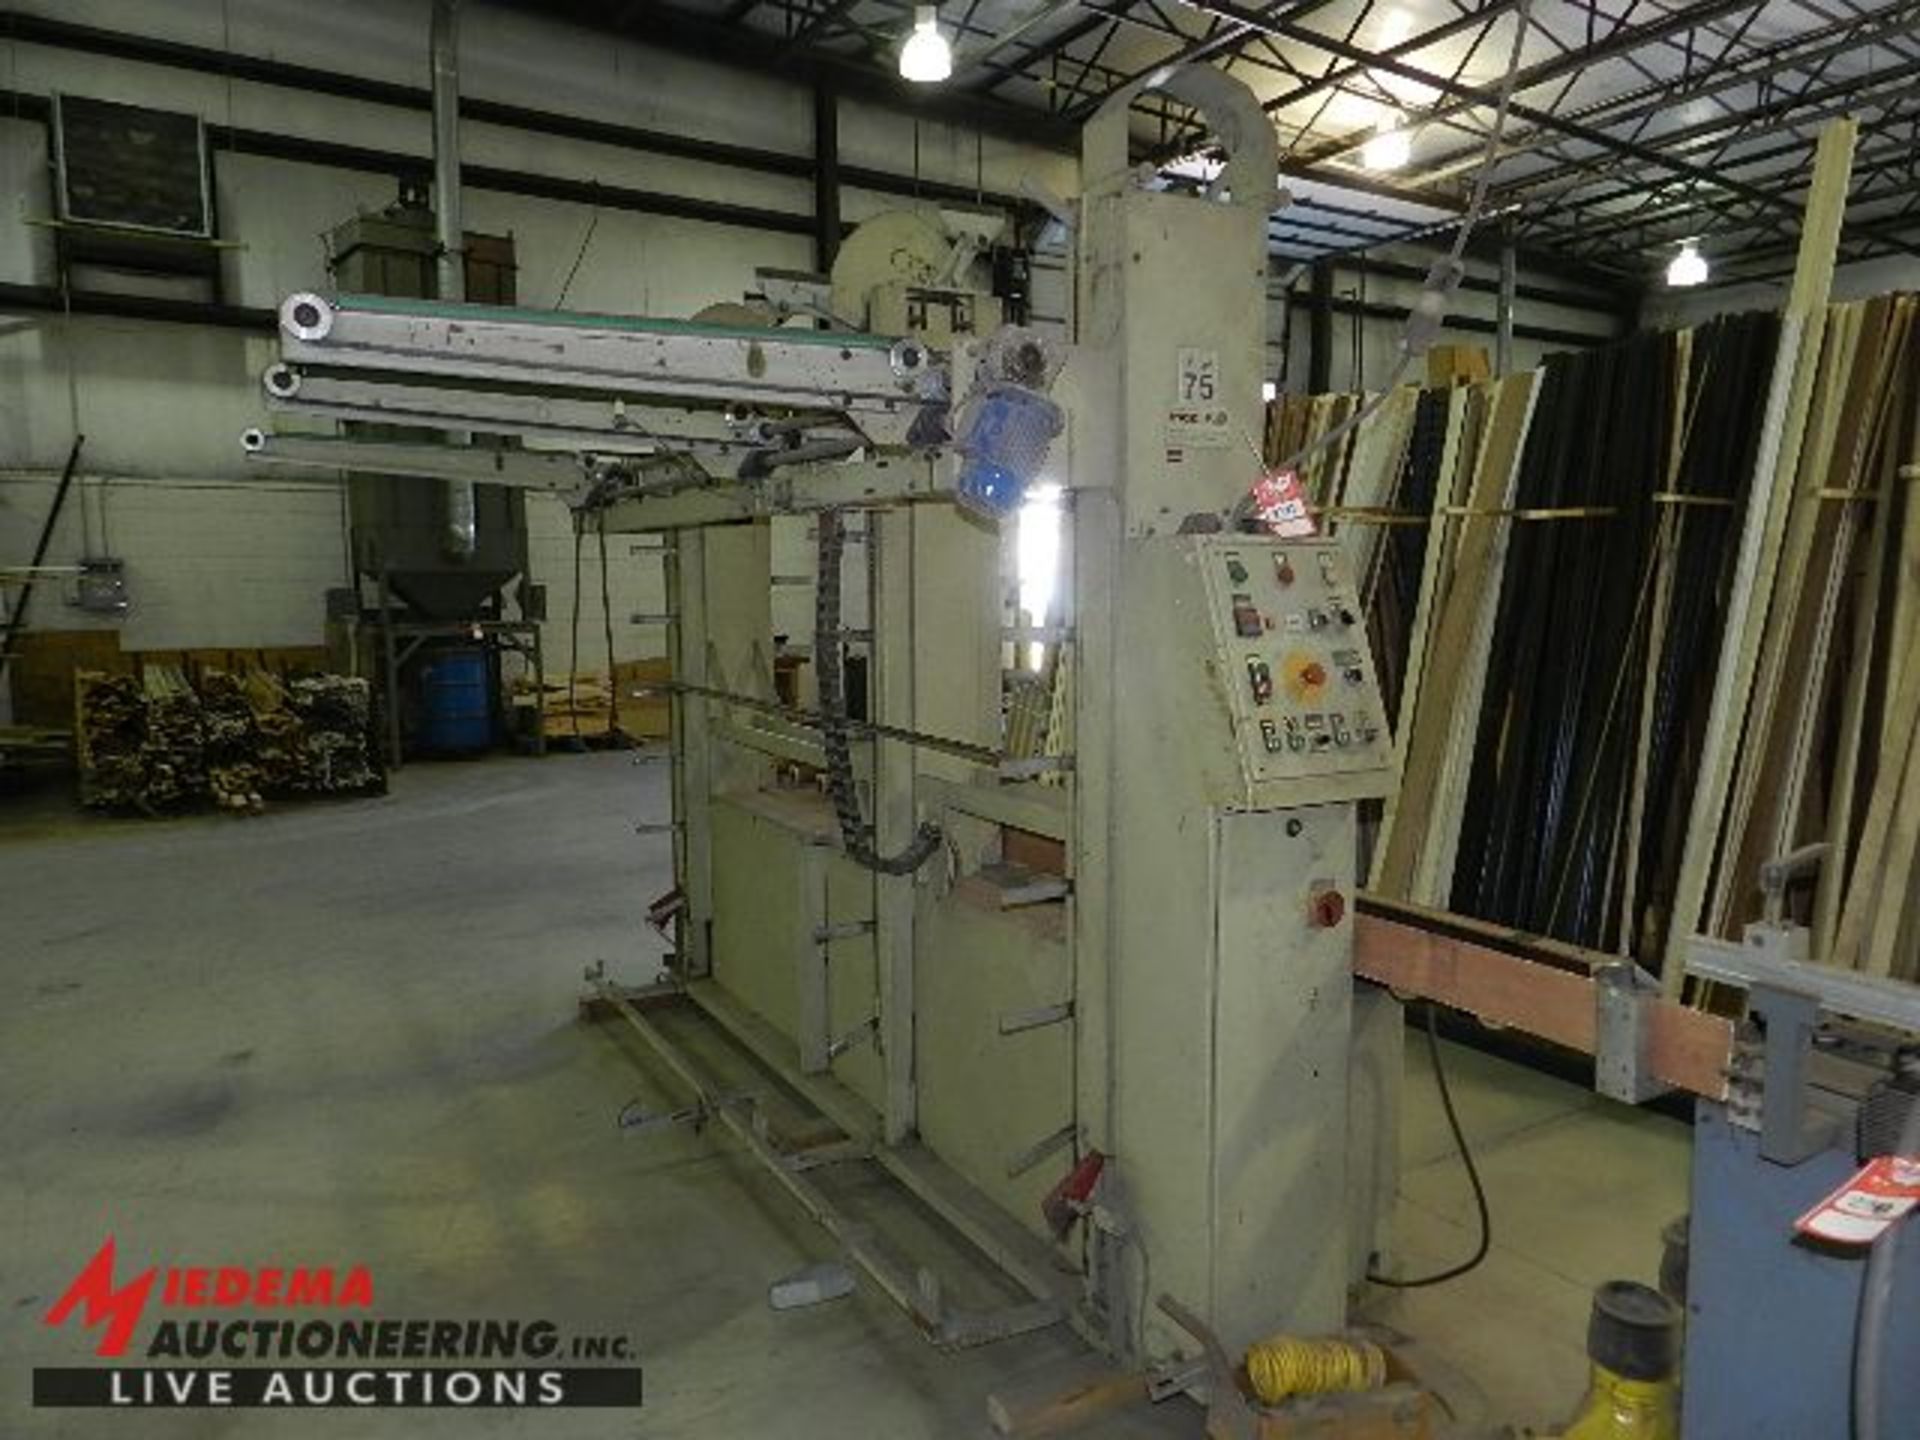 MAKOR AC-A3R MATERIAL STACKER, 1995, 3 POST, 48" STACKING ARMS, 9" ROLLER FEEDER CONVEYOR, S/N 5107